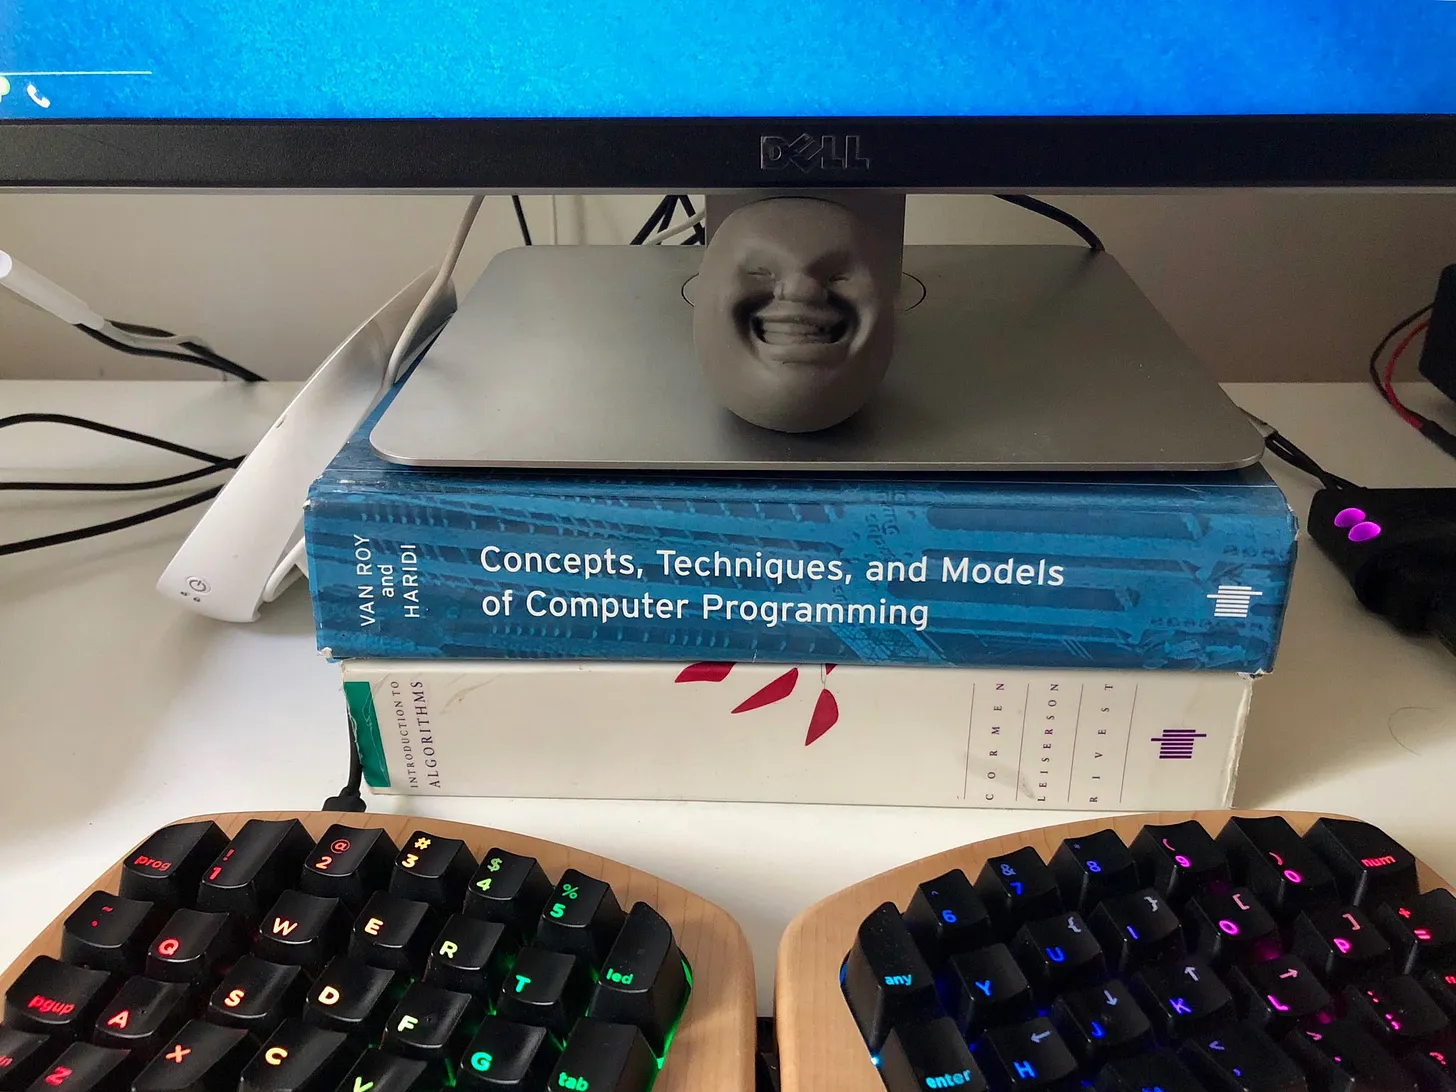 A computer monitor placed on top of old software development books to raise it higher